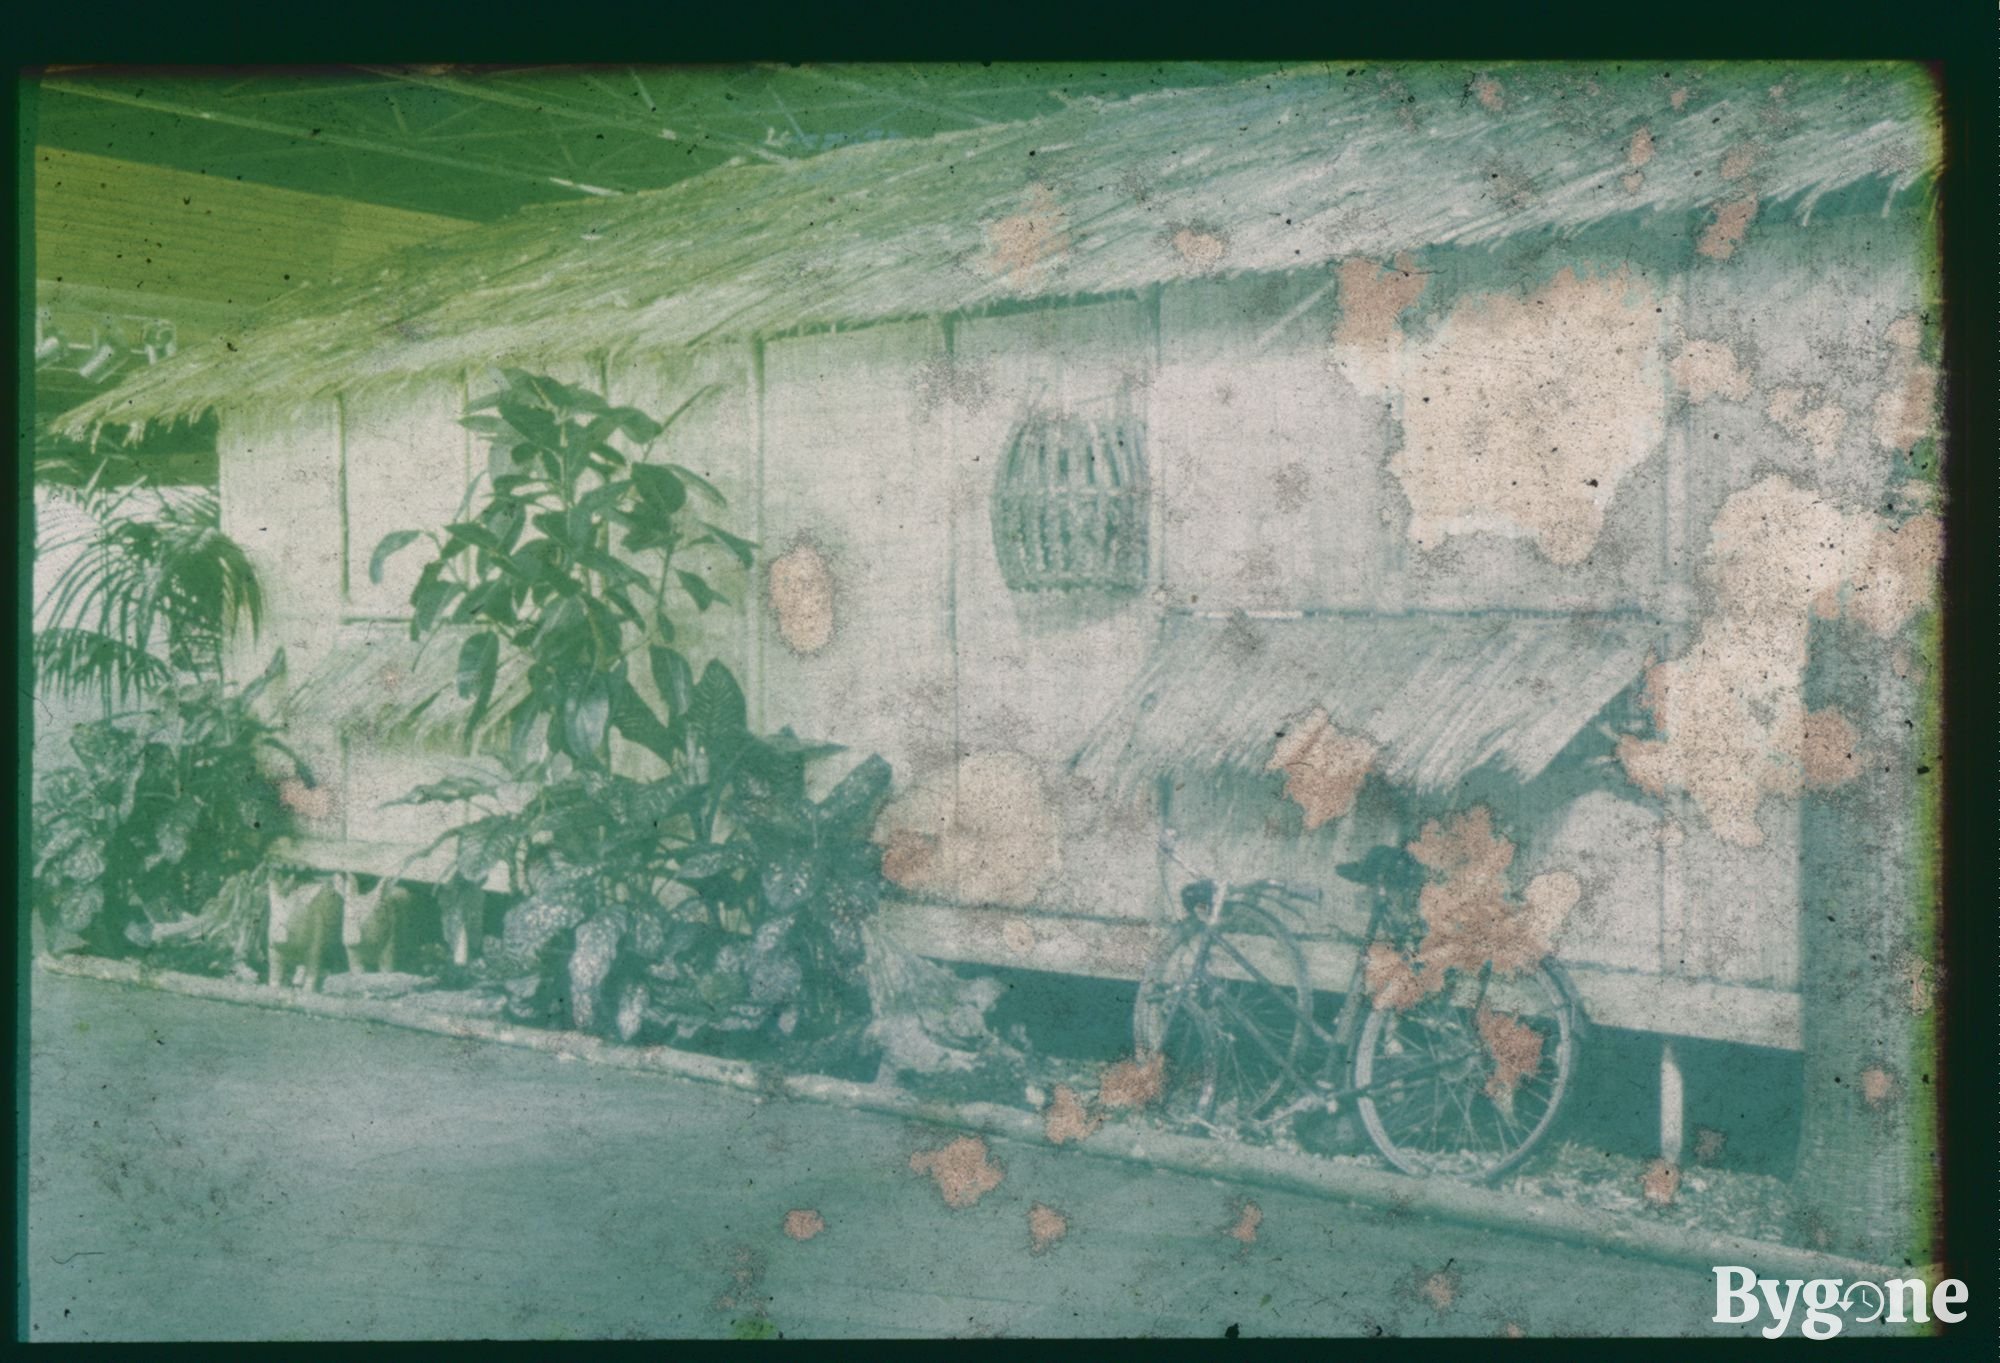 A life-size exhibit of a wooden shack with potted plants, a bicycle and two wooden pigs displayed along the side of it. The slide has incurred some damage, possibly water or bacterial, which has turned the whole of the image a bright neon green colour, with beige patches flecked across the frame.